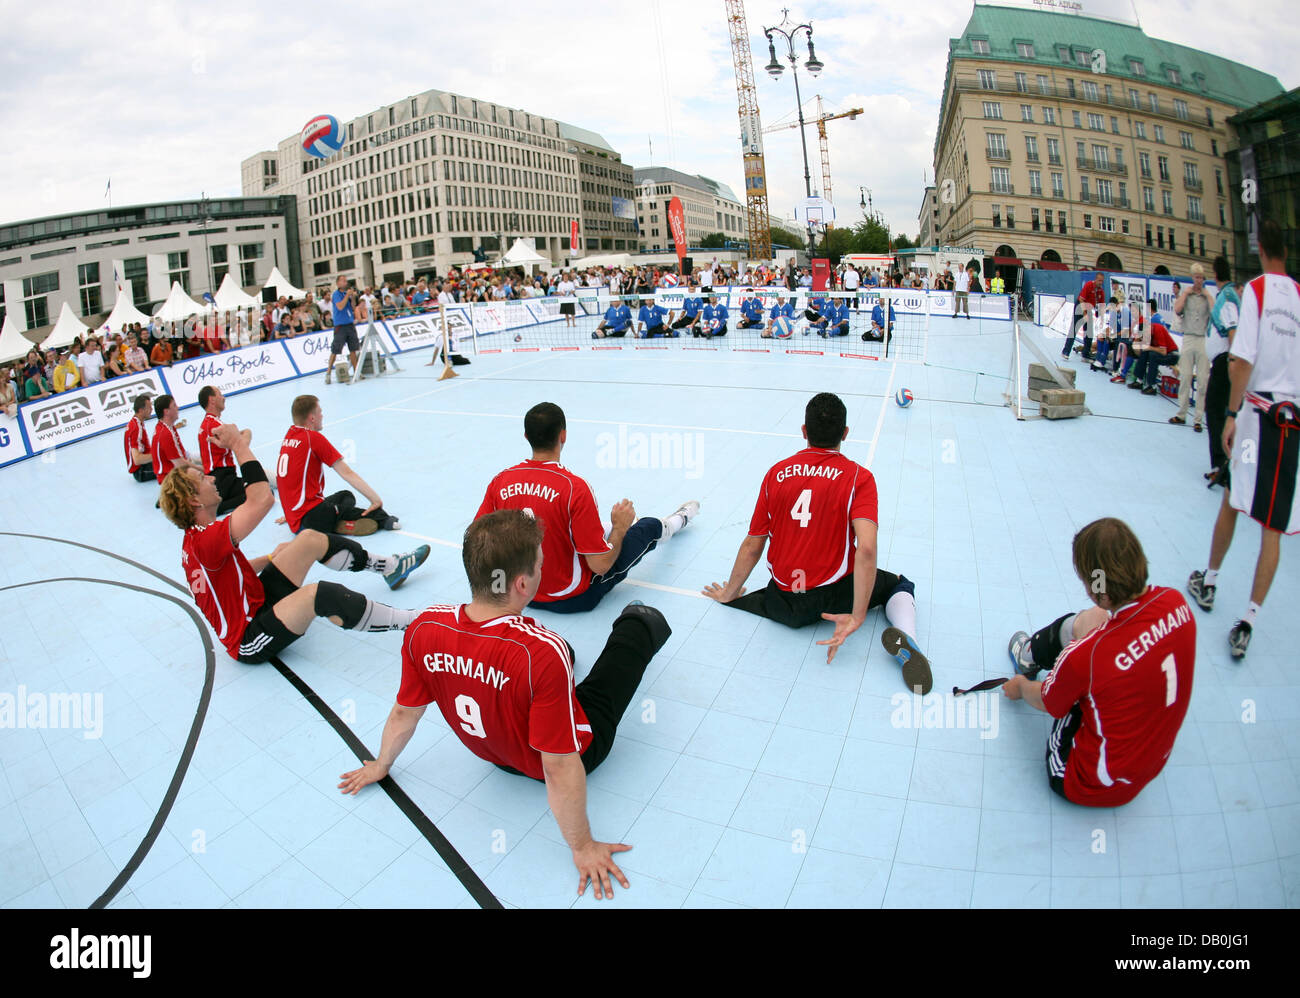 (dpa file) - The German national team and their opponents from Bosnia-Herzegovina prepare for their sitting volleyball match during the Paralympic Day at the Brandenburg Gate in Berlin, 23 August 2007. A year prior to the Paralympic Games in Beijing the 3rd Paralympic Day takes place in Berlin. Photo: Rainer Jensen Stock Photo